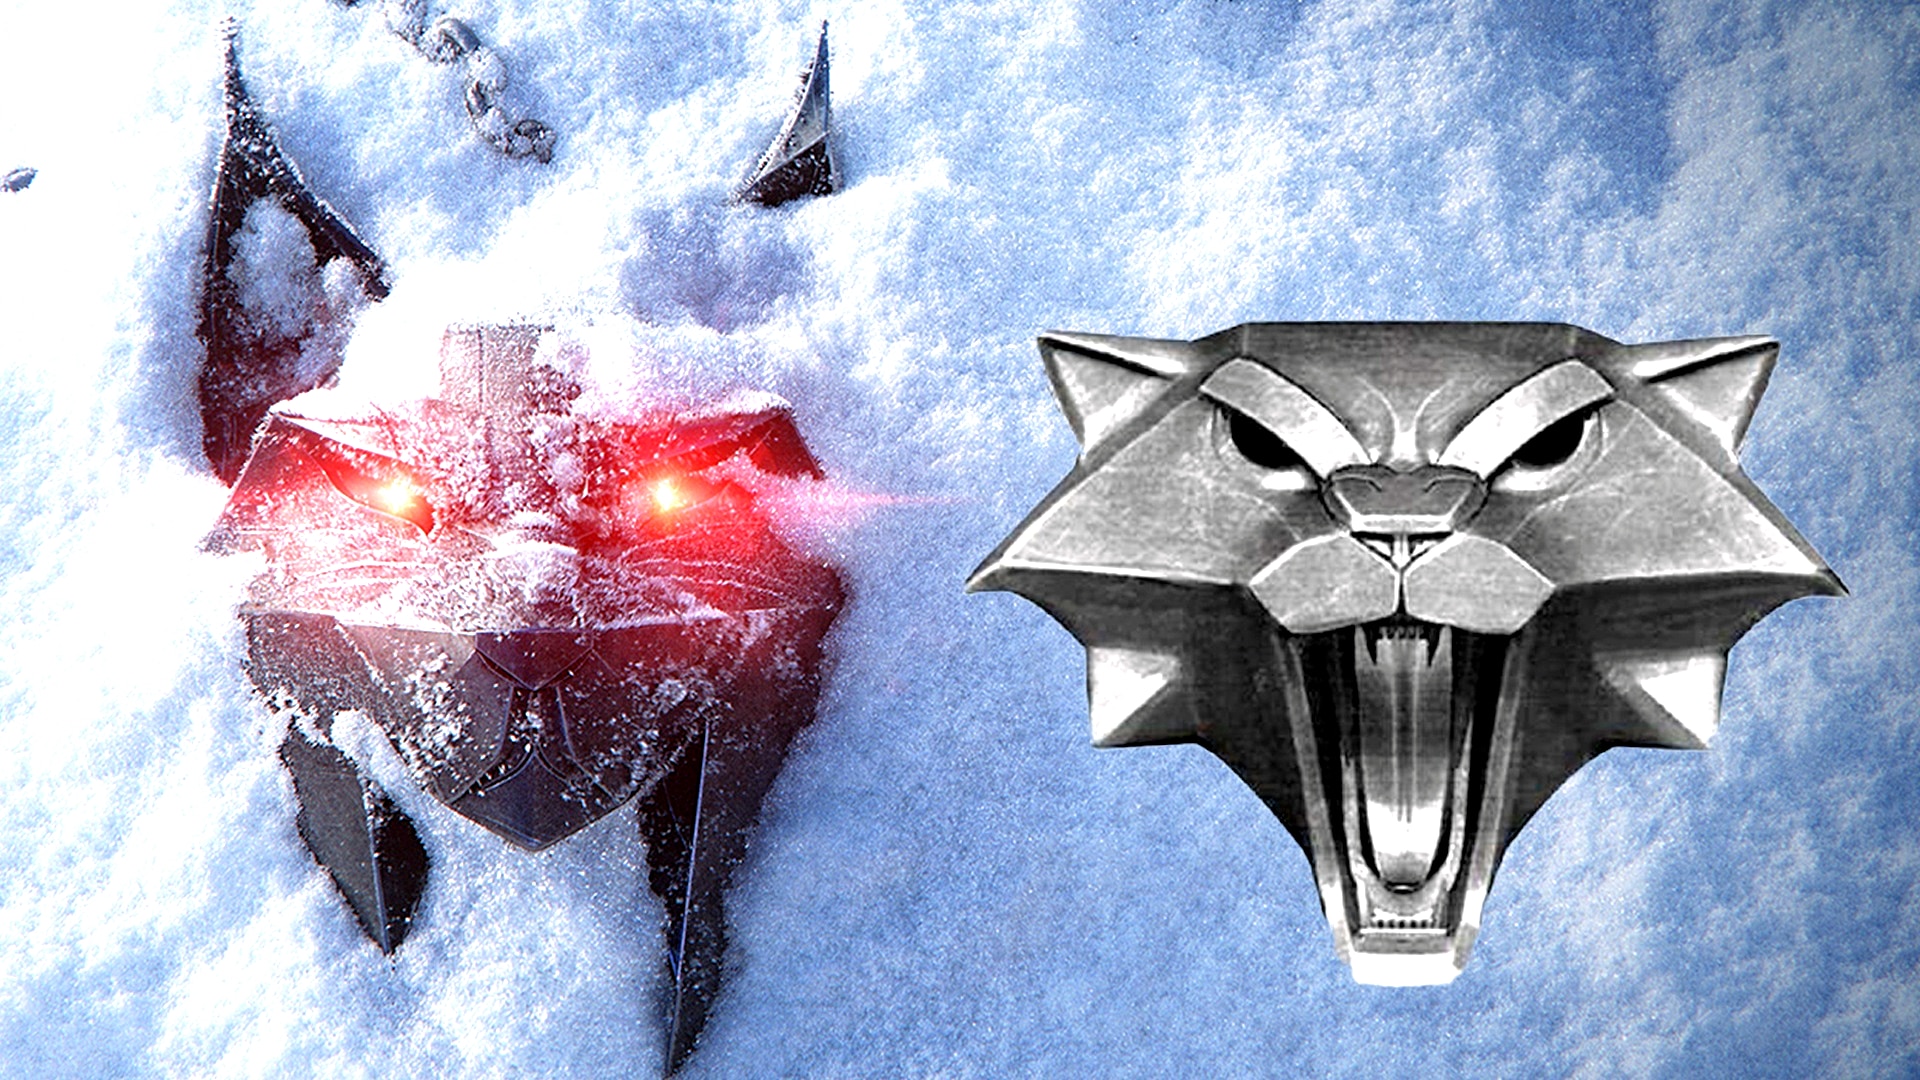 On closer inspection, the medallion from the teaser doesn't show a cat, but a lynx. A hint of fanfiction?